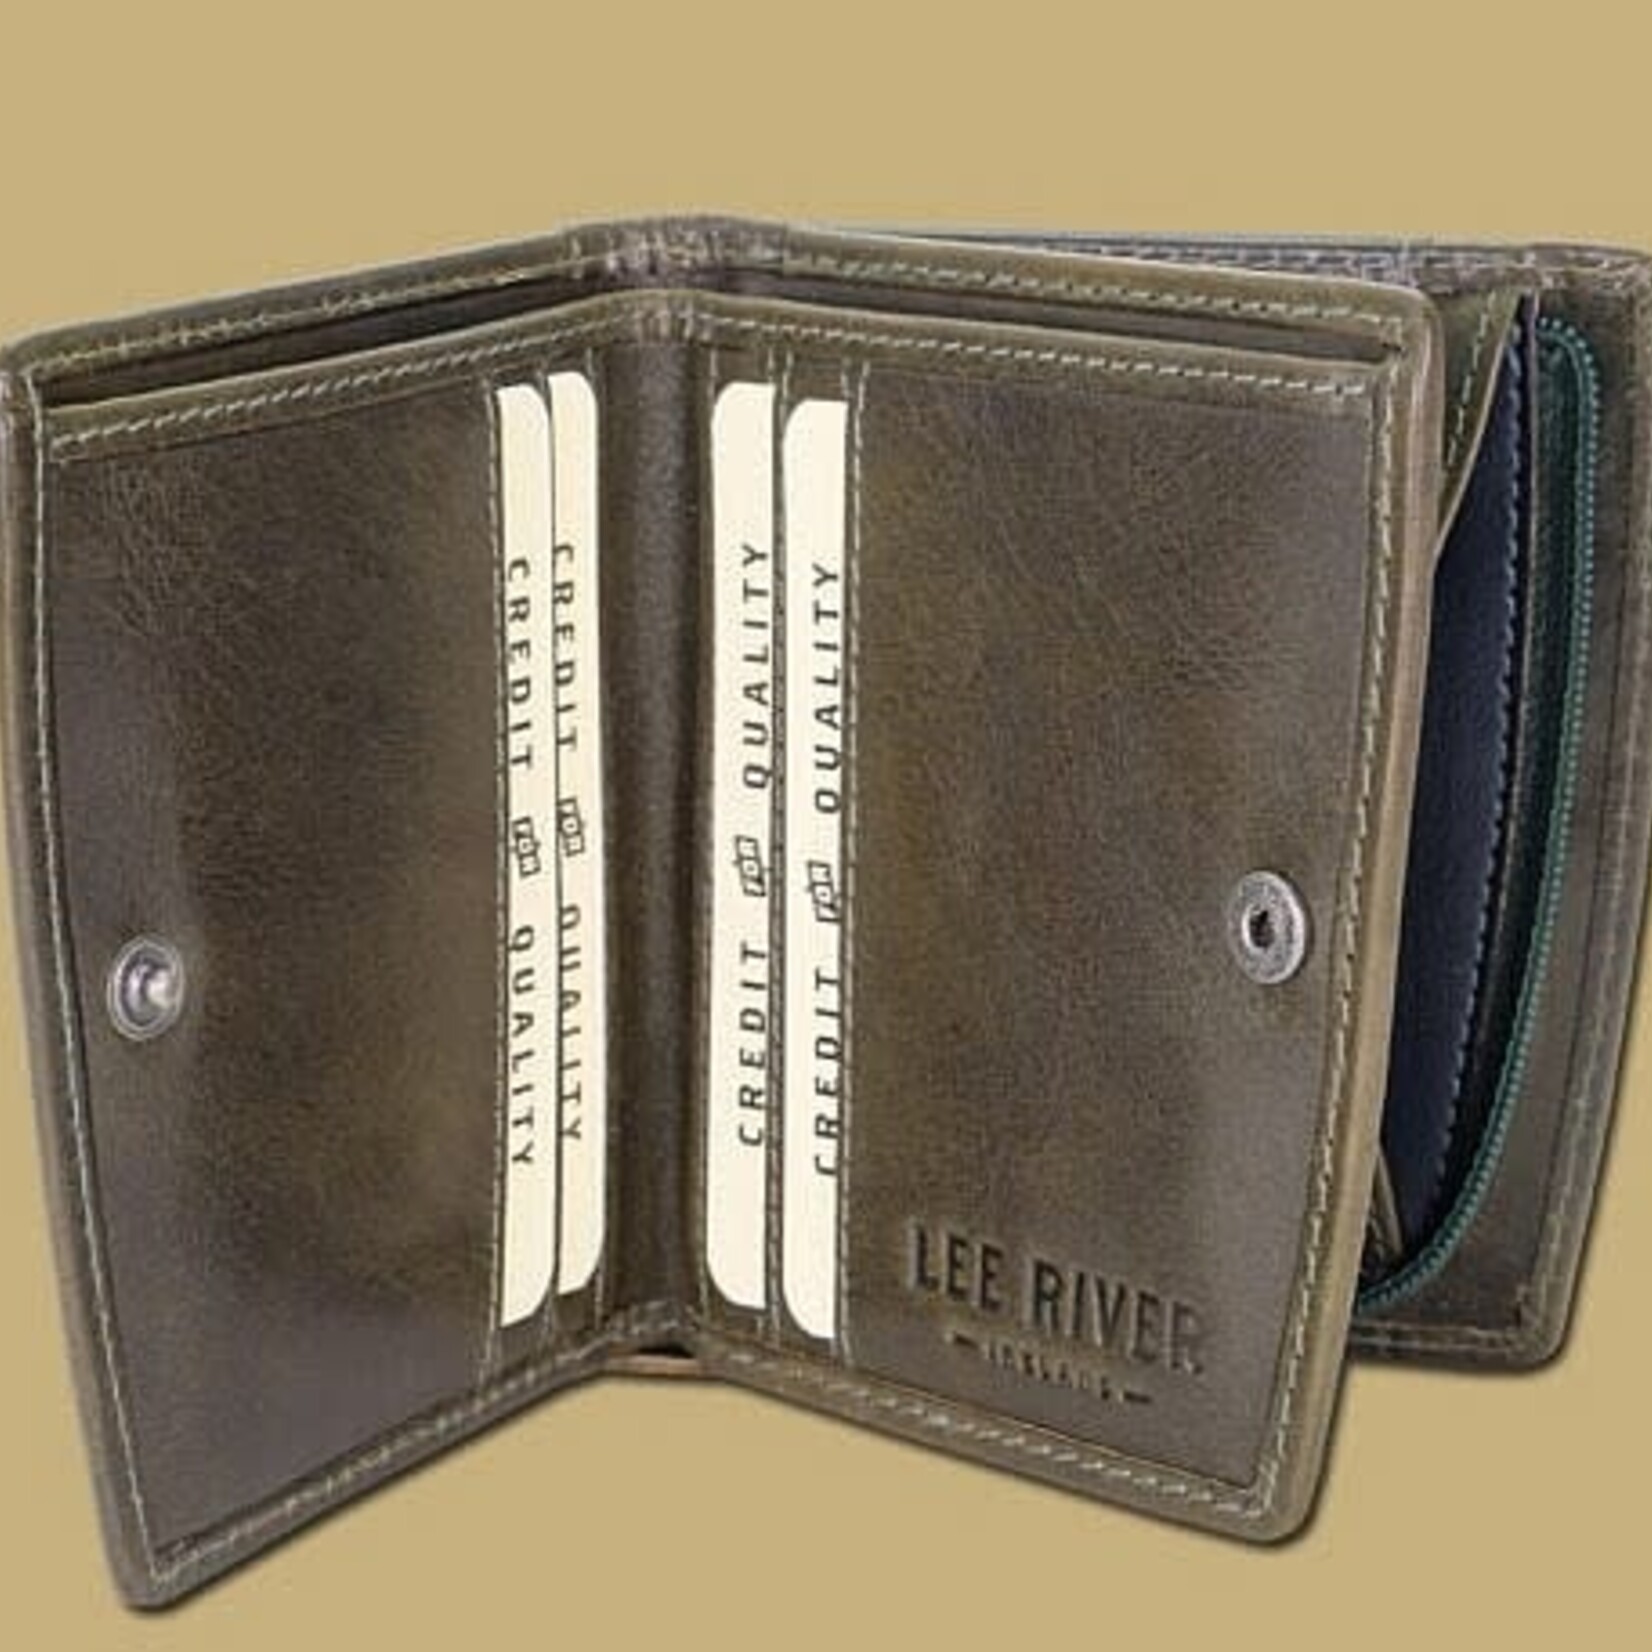 Lee River Leather Wallet: Caitlin